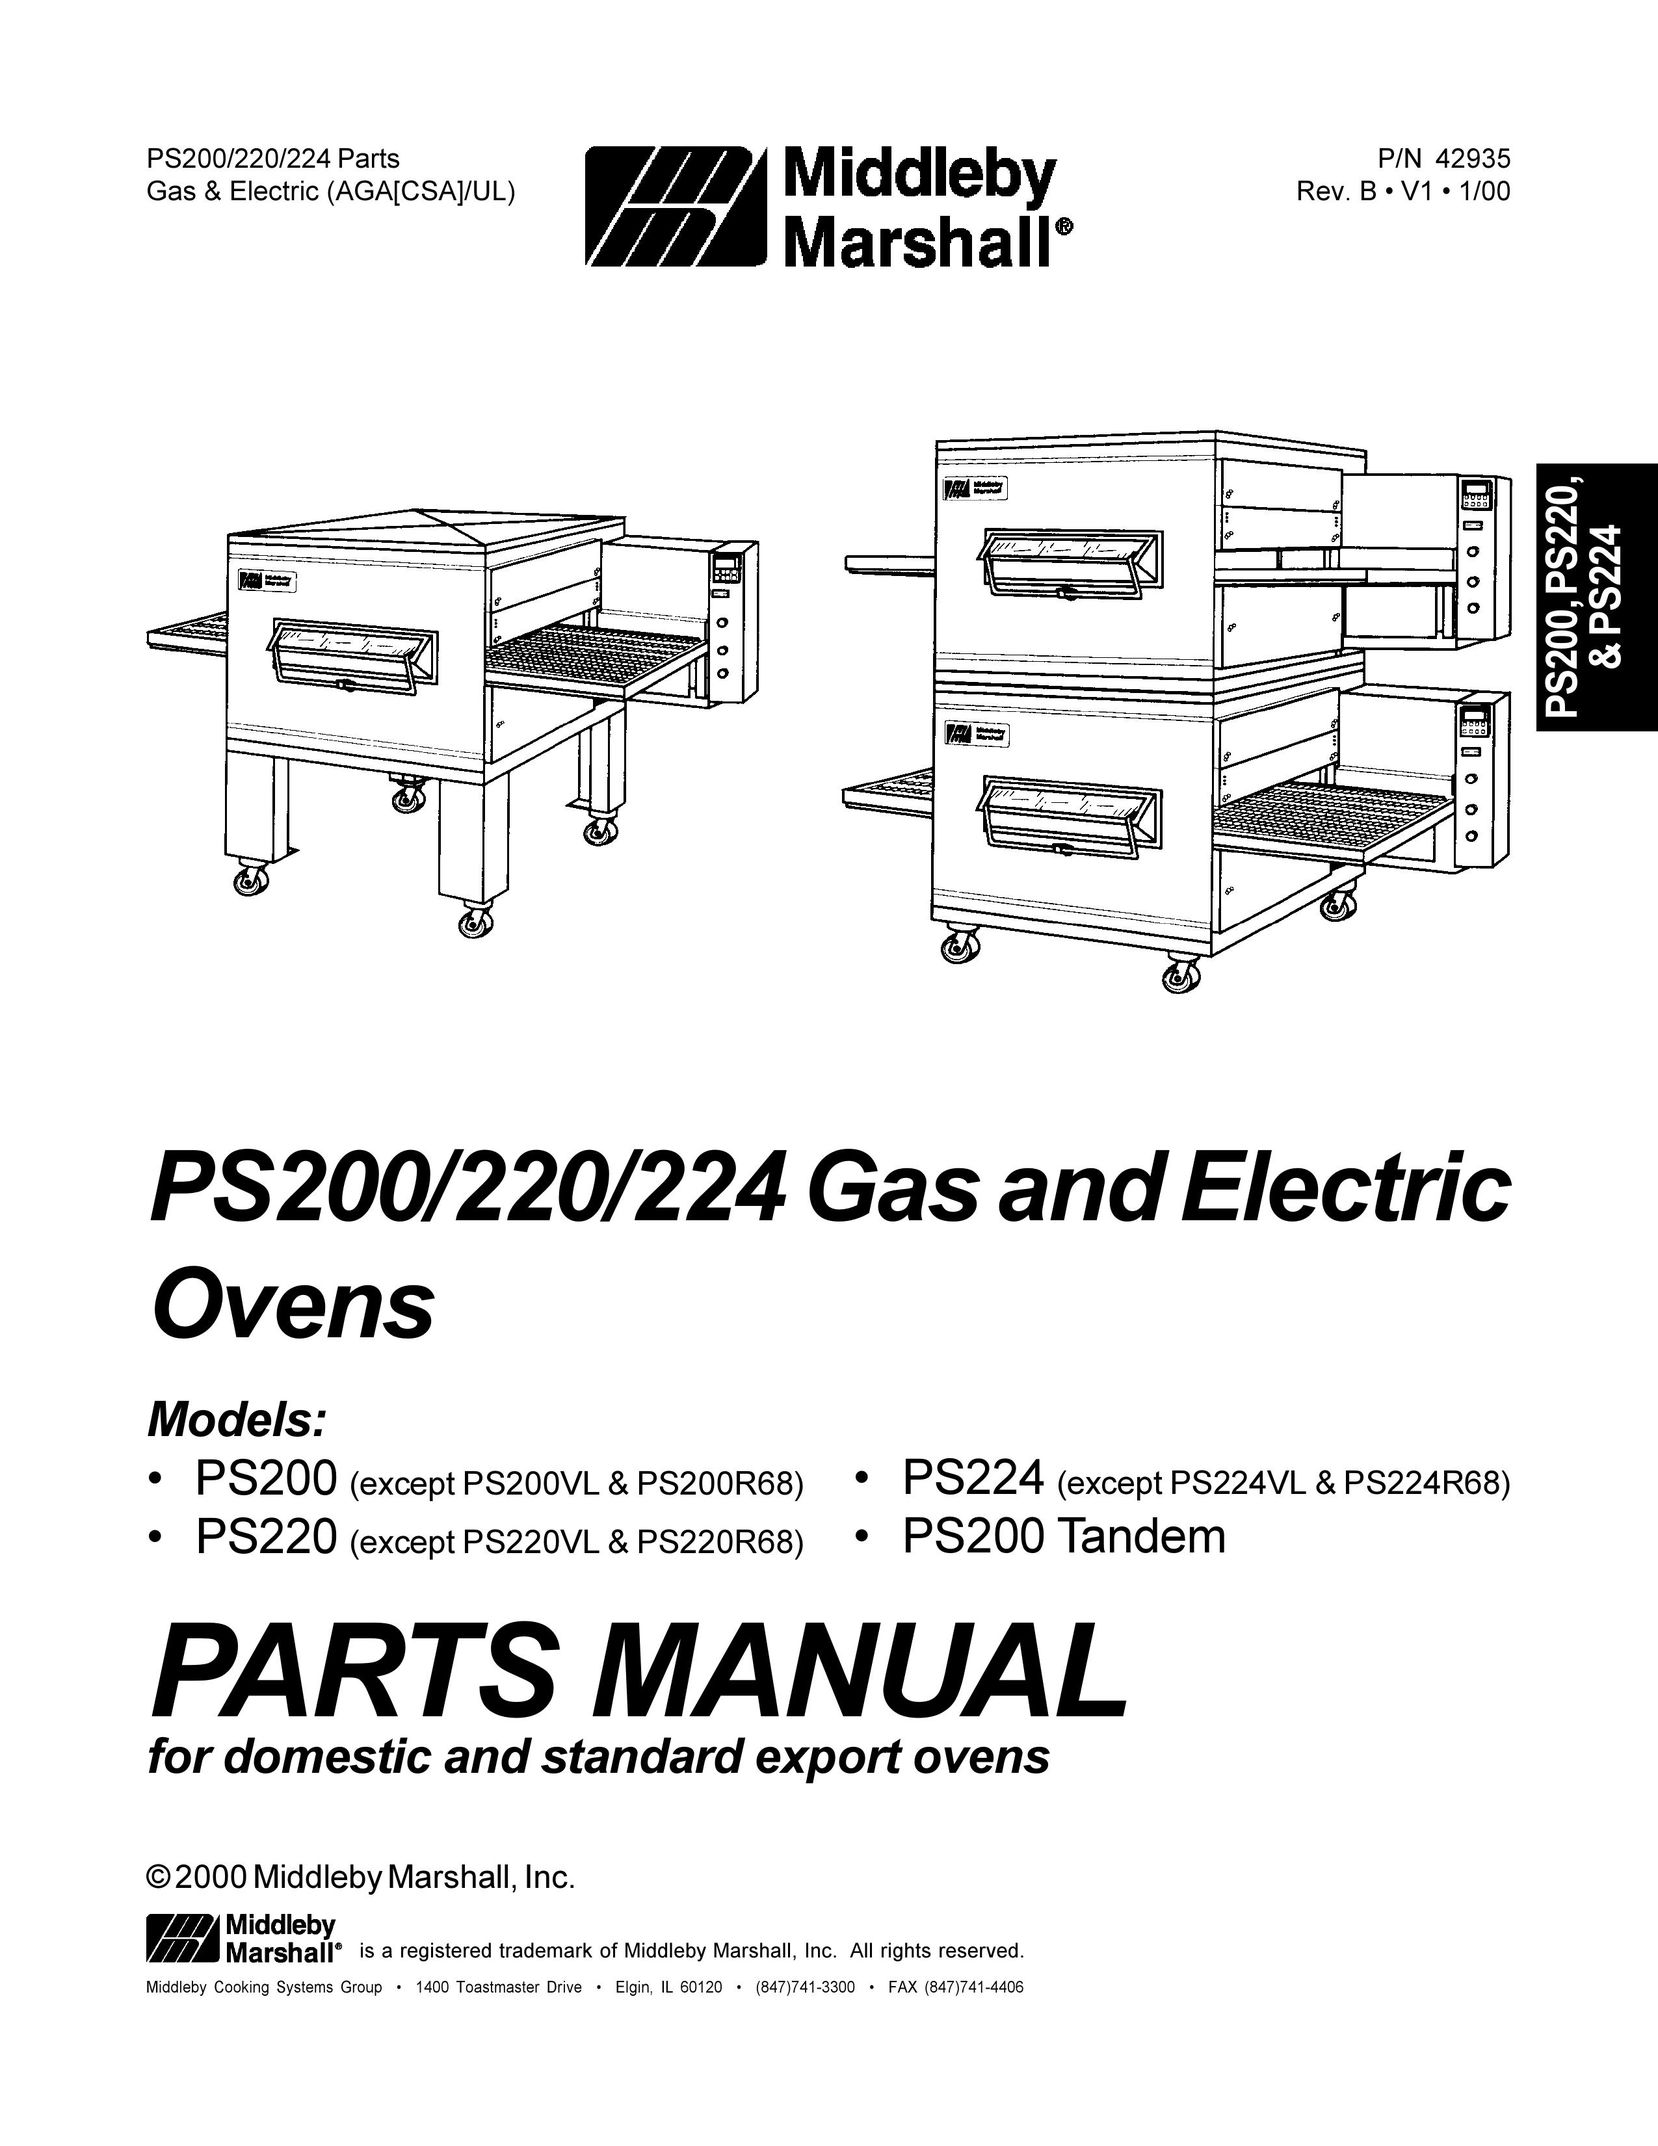 Middleby Marshall PS200 Oven User Manual